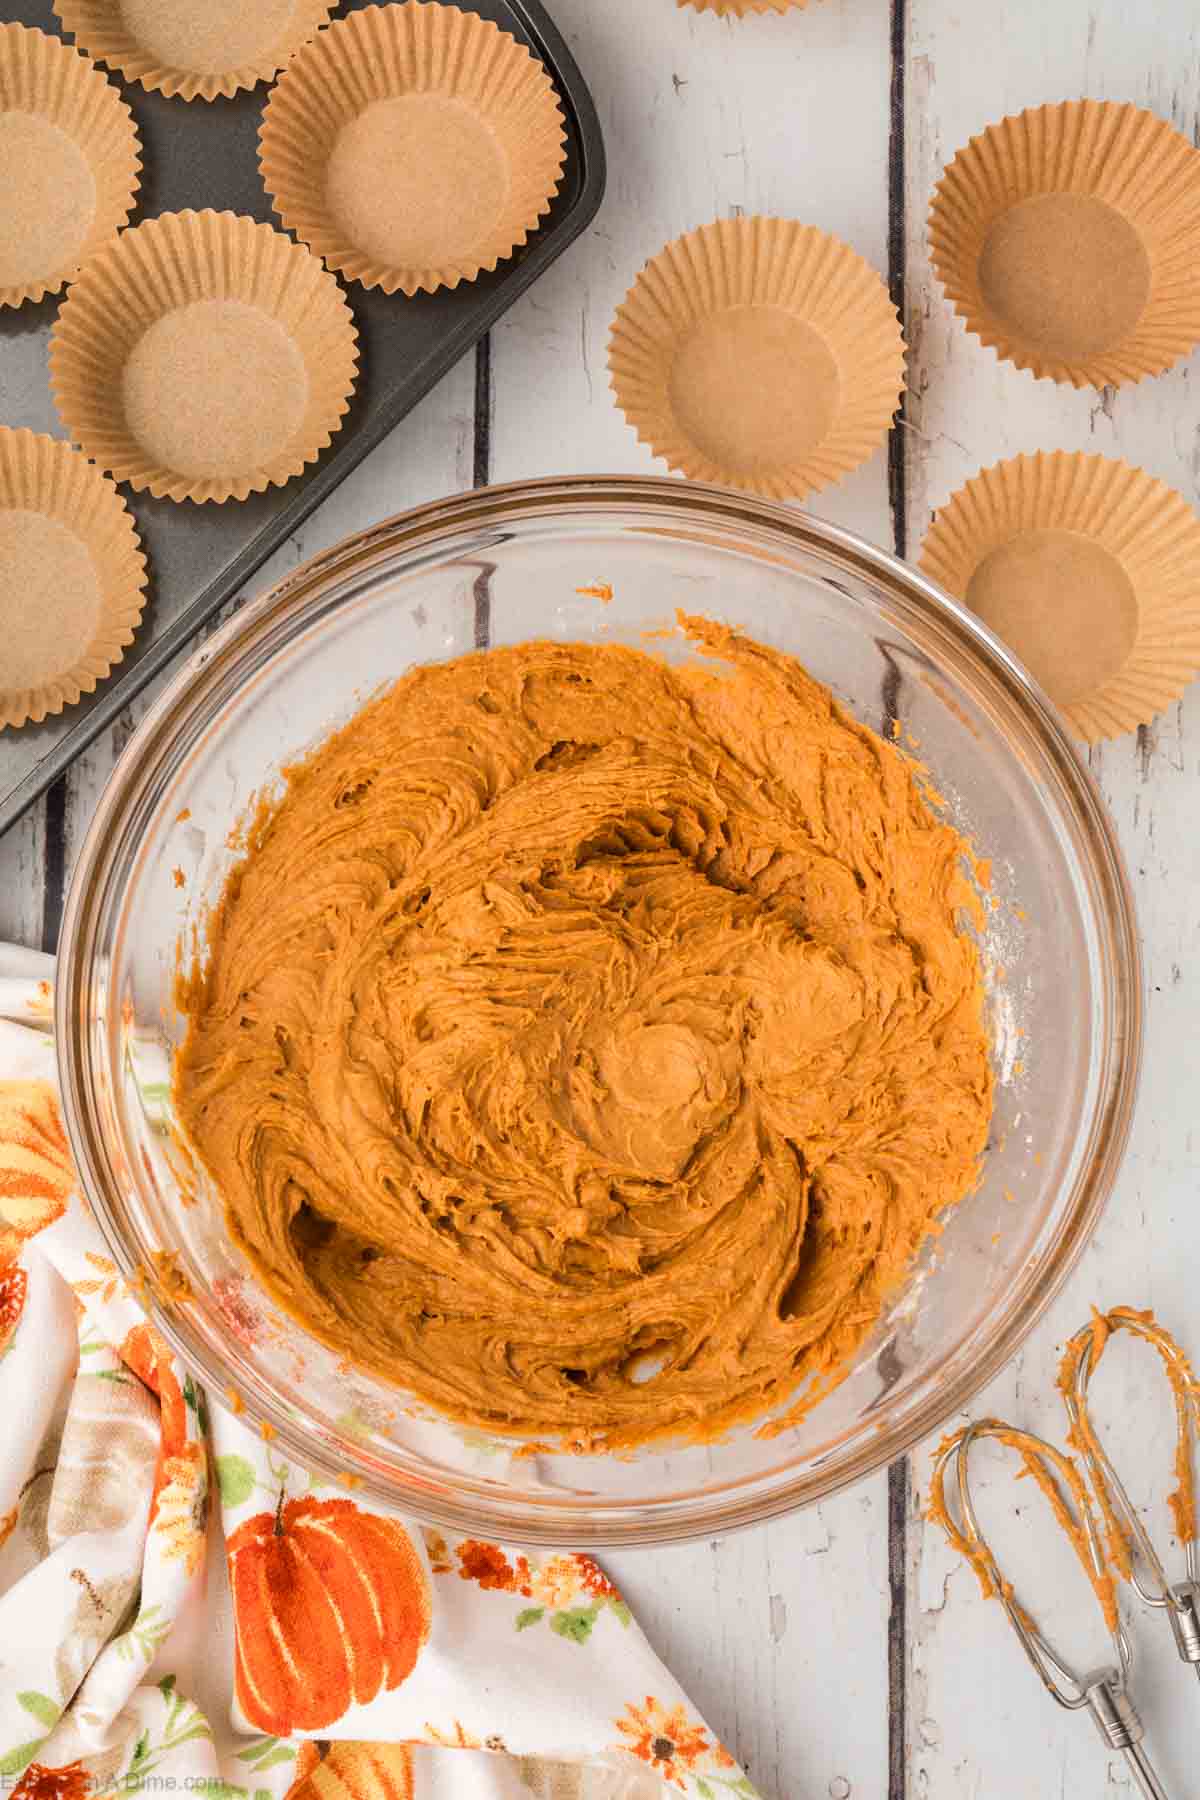 A glass mixing bowl filled with 2 Ingredient Pumpkin Muffins batter sits on a white wooden table. Surrounding the bowl are scattered empty brown muffin liners and a tray with liners set in it. A floral dish towel and a whisk complete the cozy baking scene.